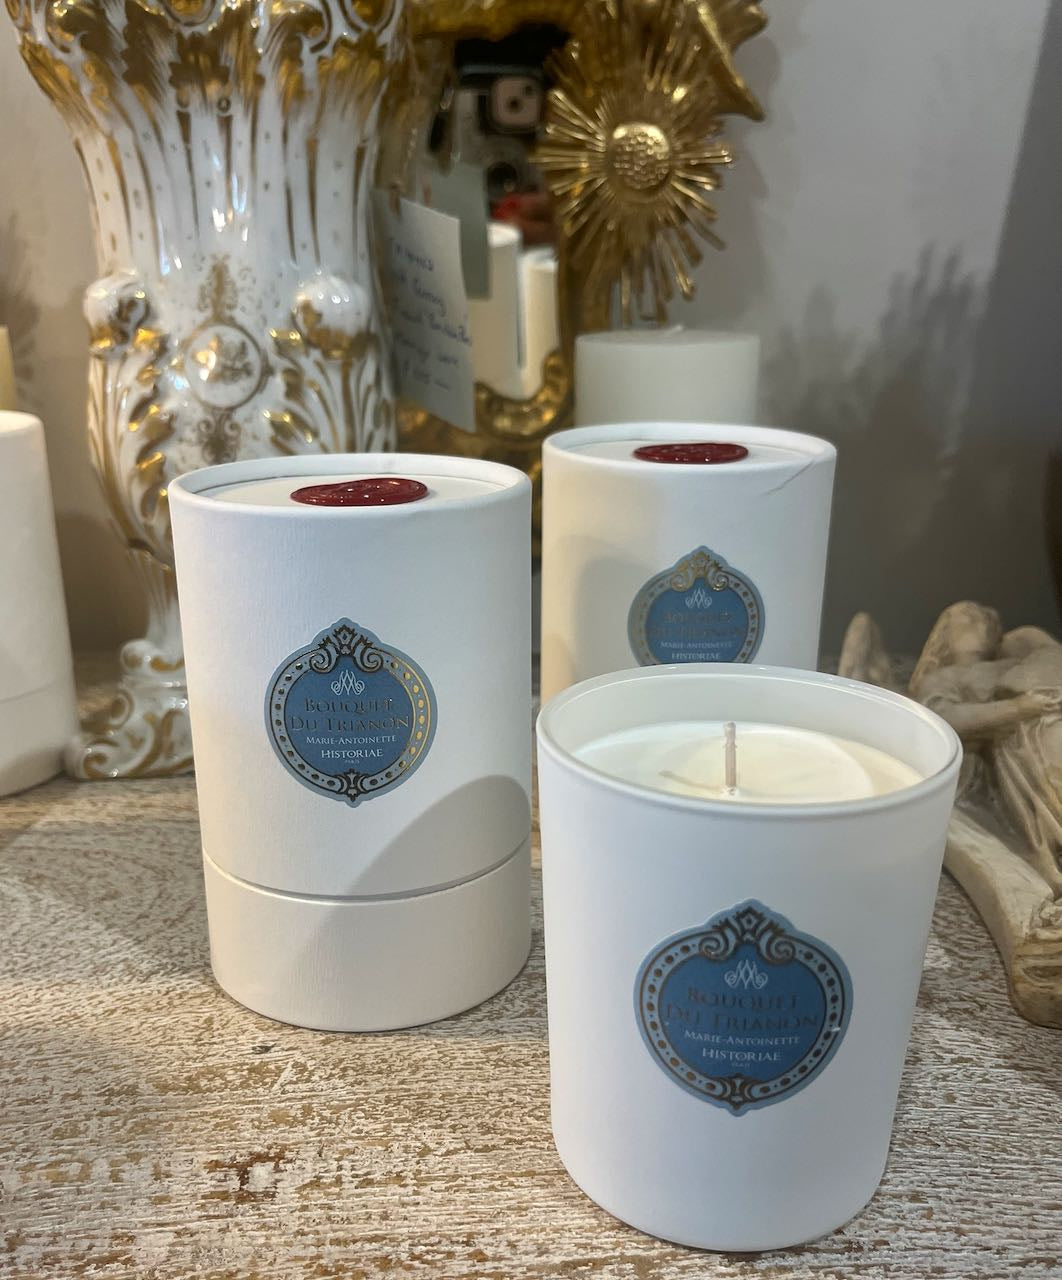 Hi03 BOUQUET DU TRIANON  candle, from Provence, France (LIMITED STOCK)